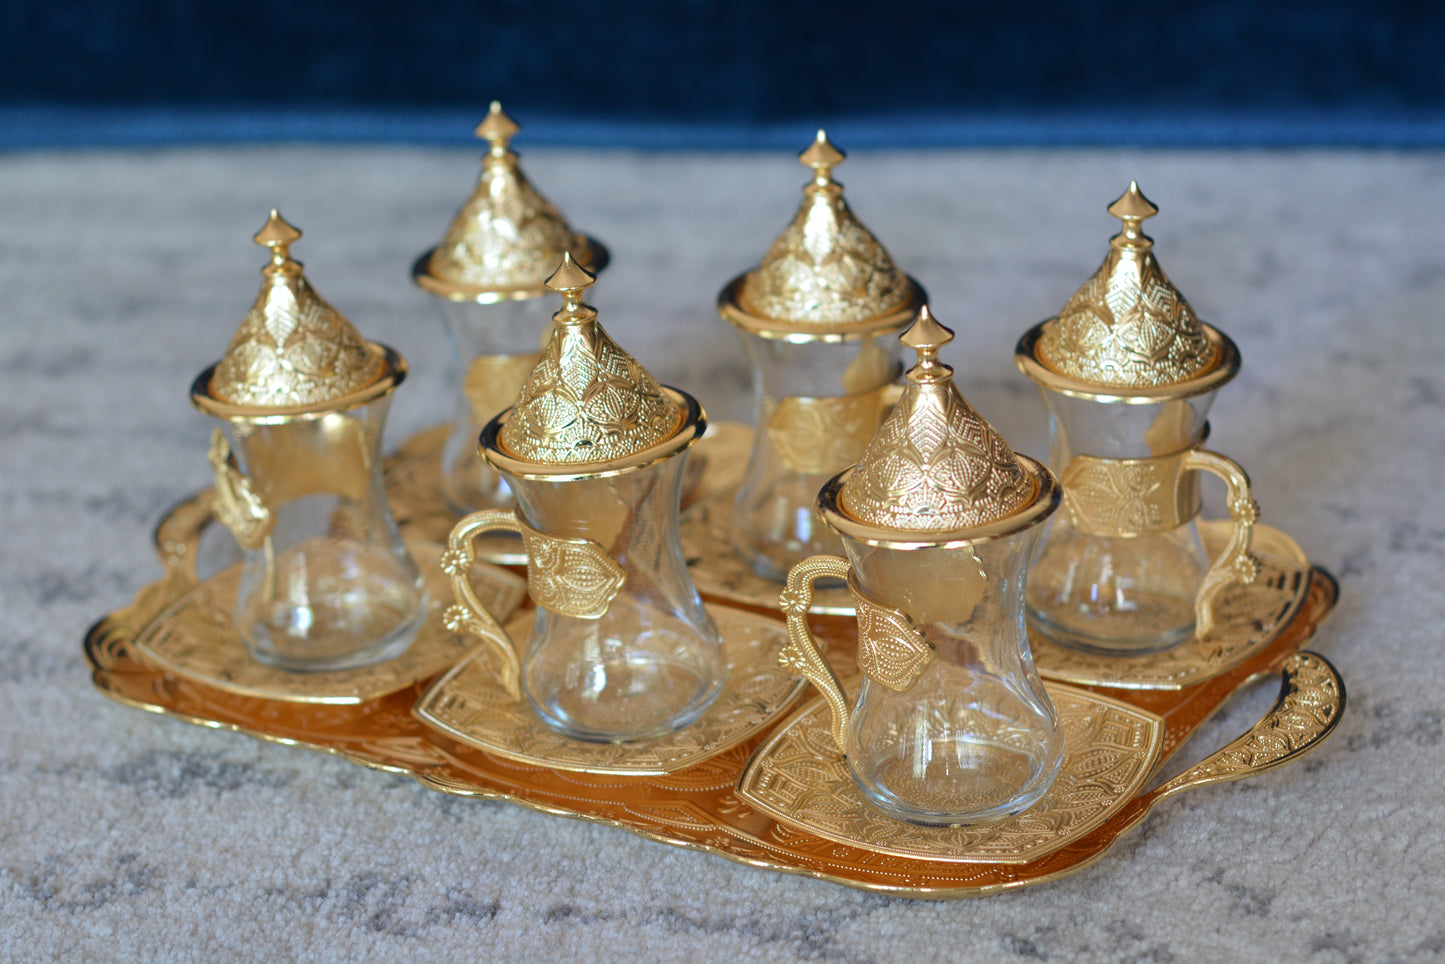 Premium Gold Turkish Tea Cups with Tops Serves 6